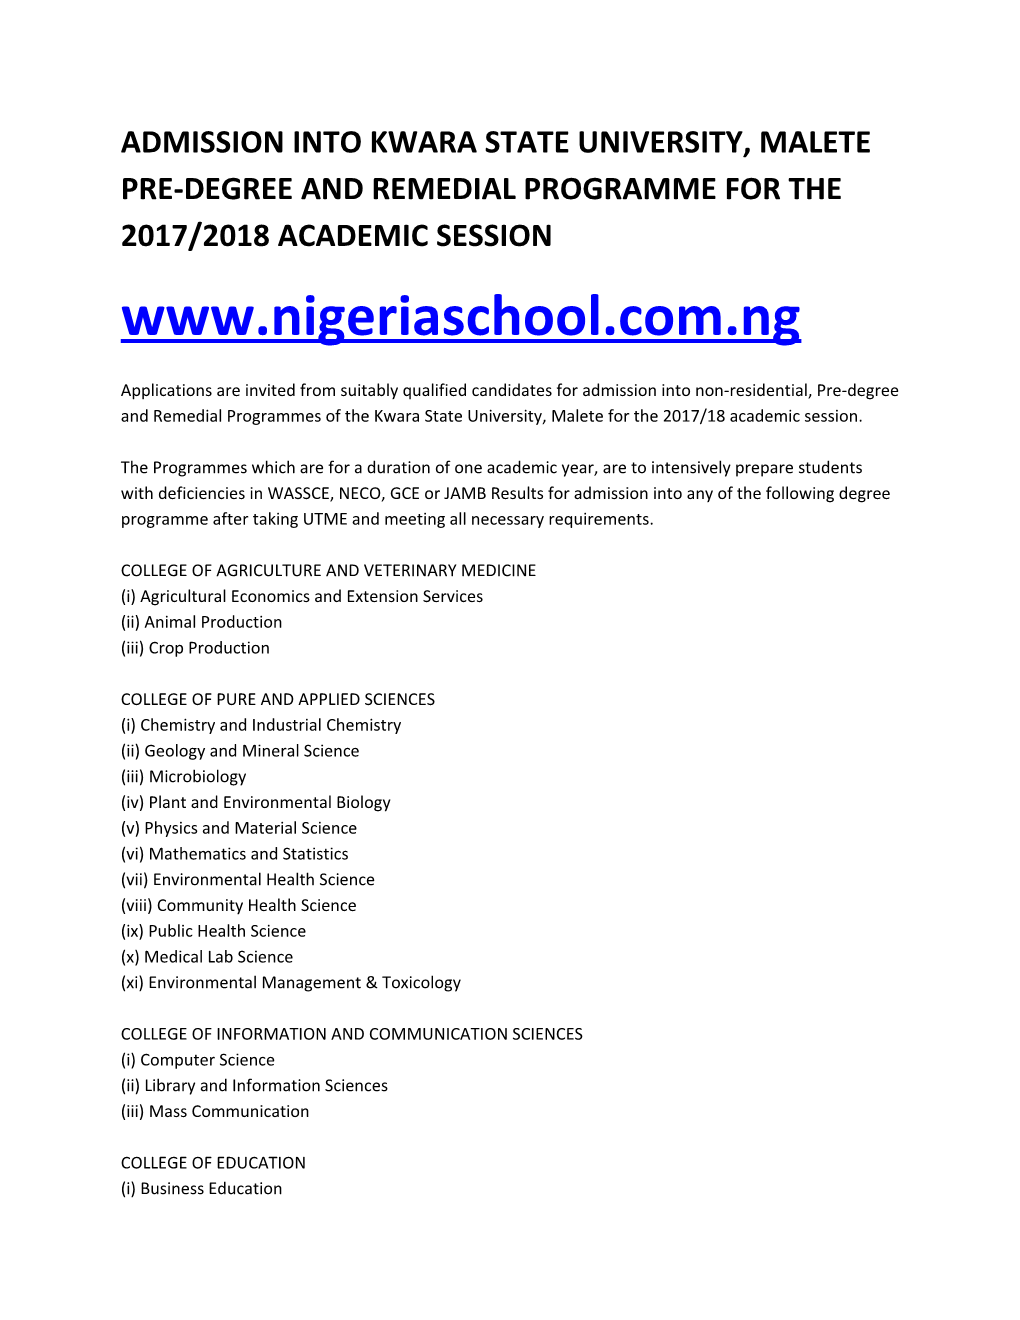 Admission Into Kwara State University, Malete Pre-Degree and Remedial Programme for The